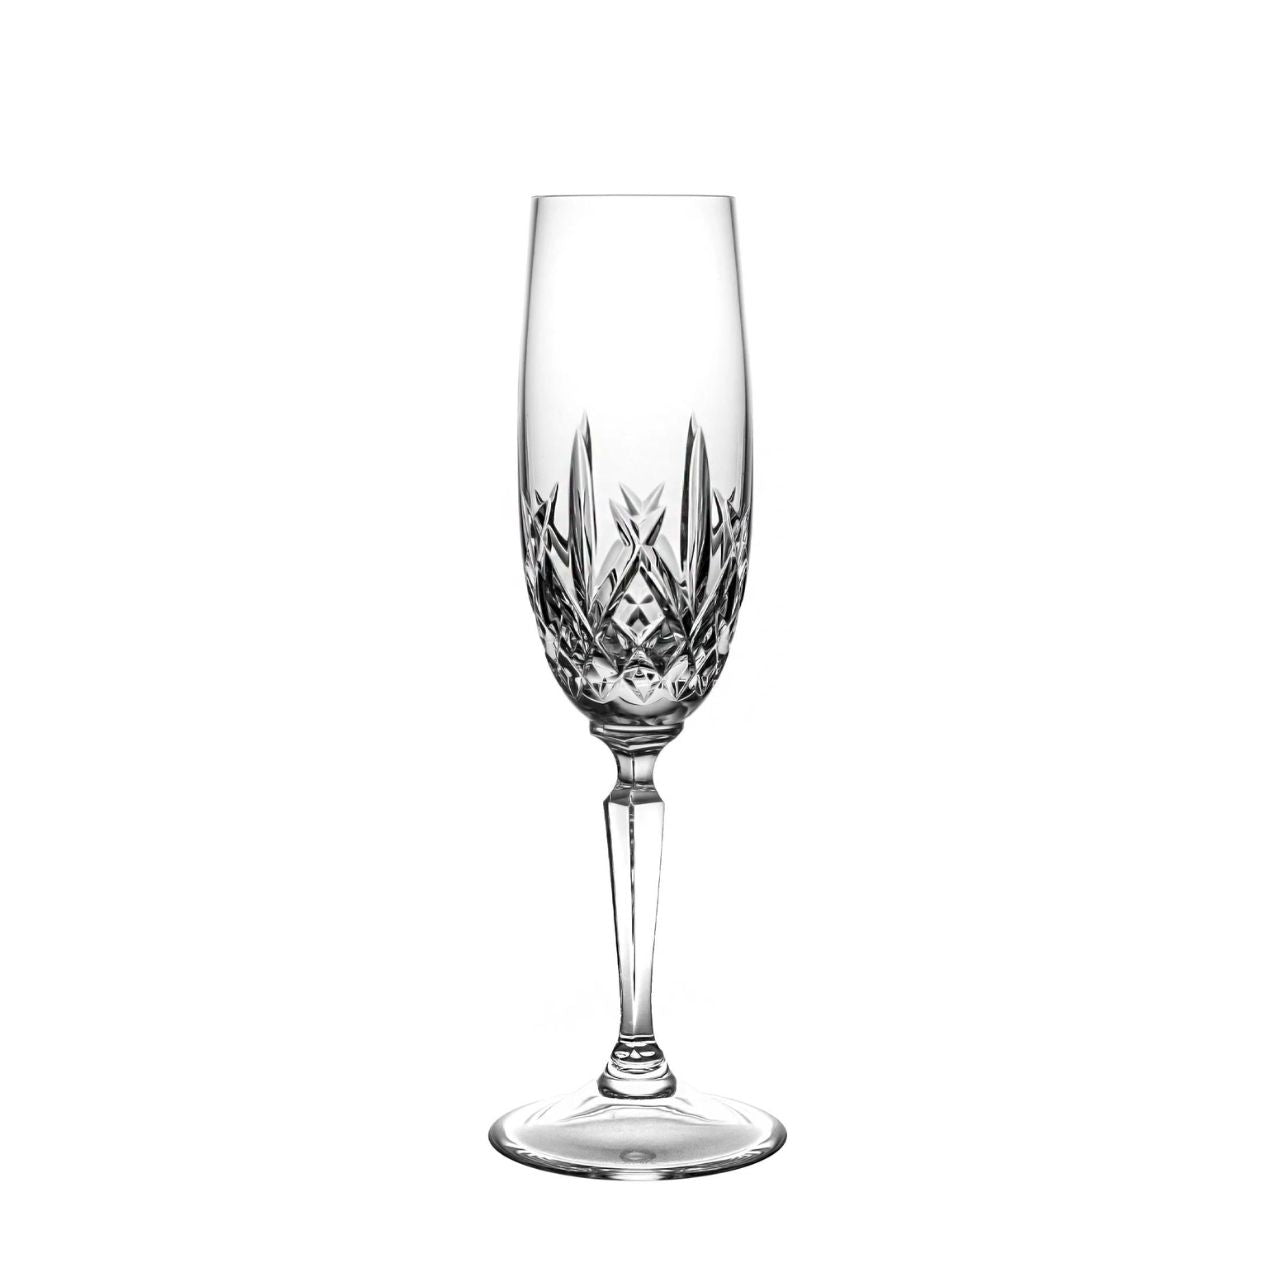 Waterford Crystal Newgrange Champagne Flute  Discover our luxurious collection of crystal champagne flute glasses, each one elegantly crafted to be the perfect addition to a toast with loved ones.  Discontinued Waterford Newgrange pattern